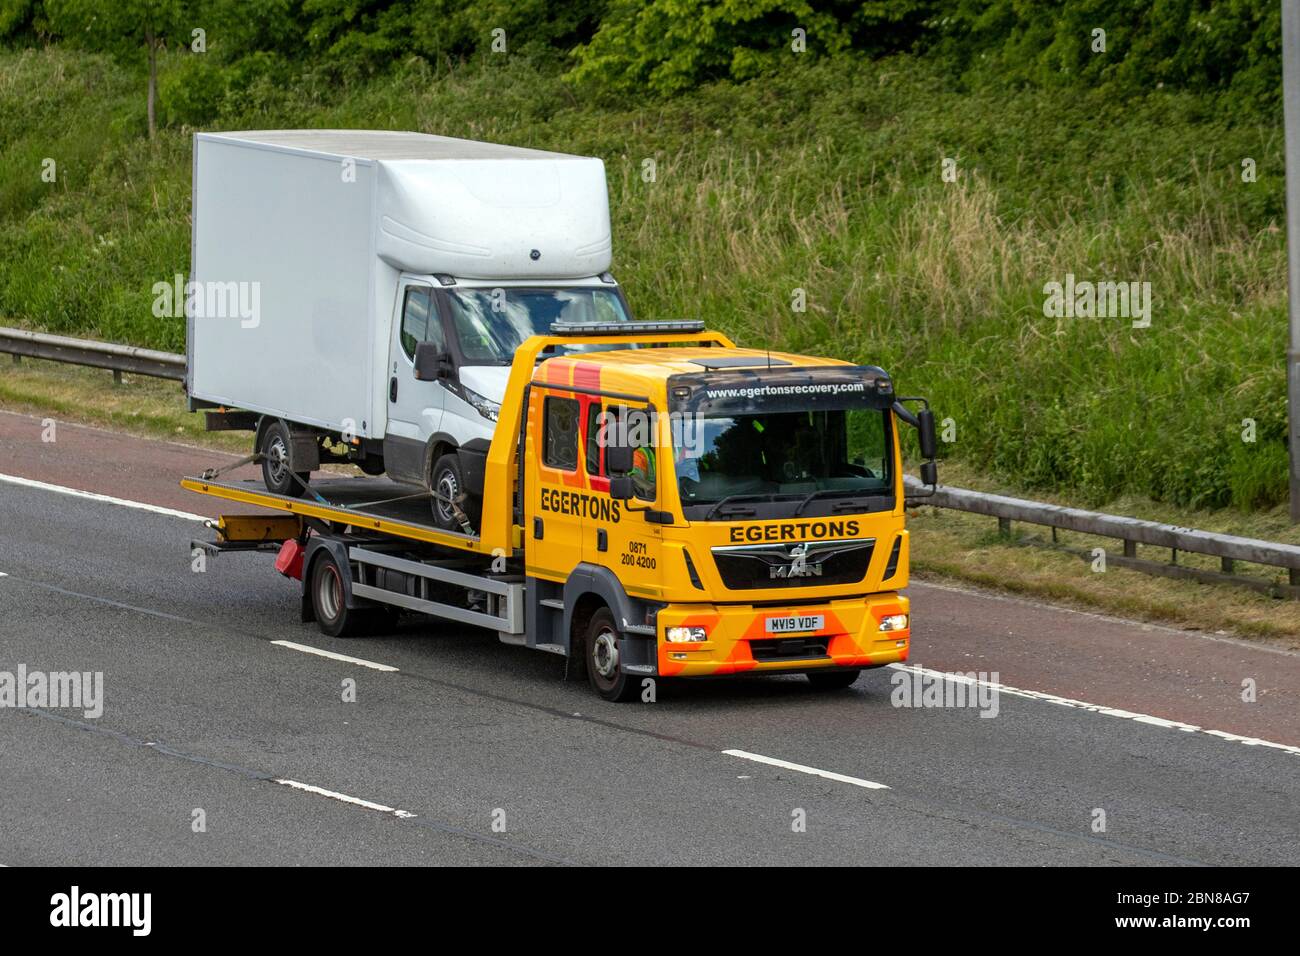 Egertons 24 hr breakdown commercial breakdown recovery service;  Haulage delivery trucks, lorry, transportation, truck, cargo carrier, Scania vehicle, European commercial transport, industry, M61 at Manchester, UK Stock Photo